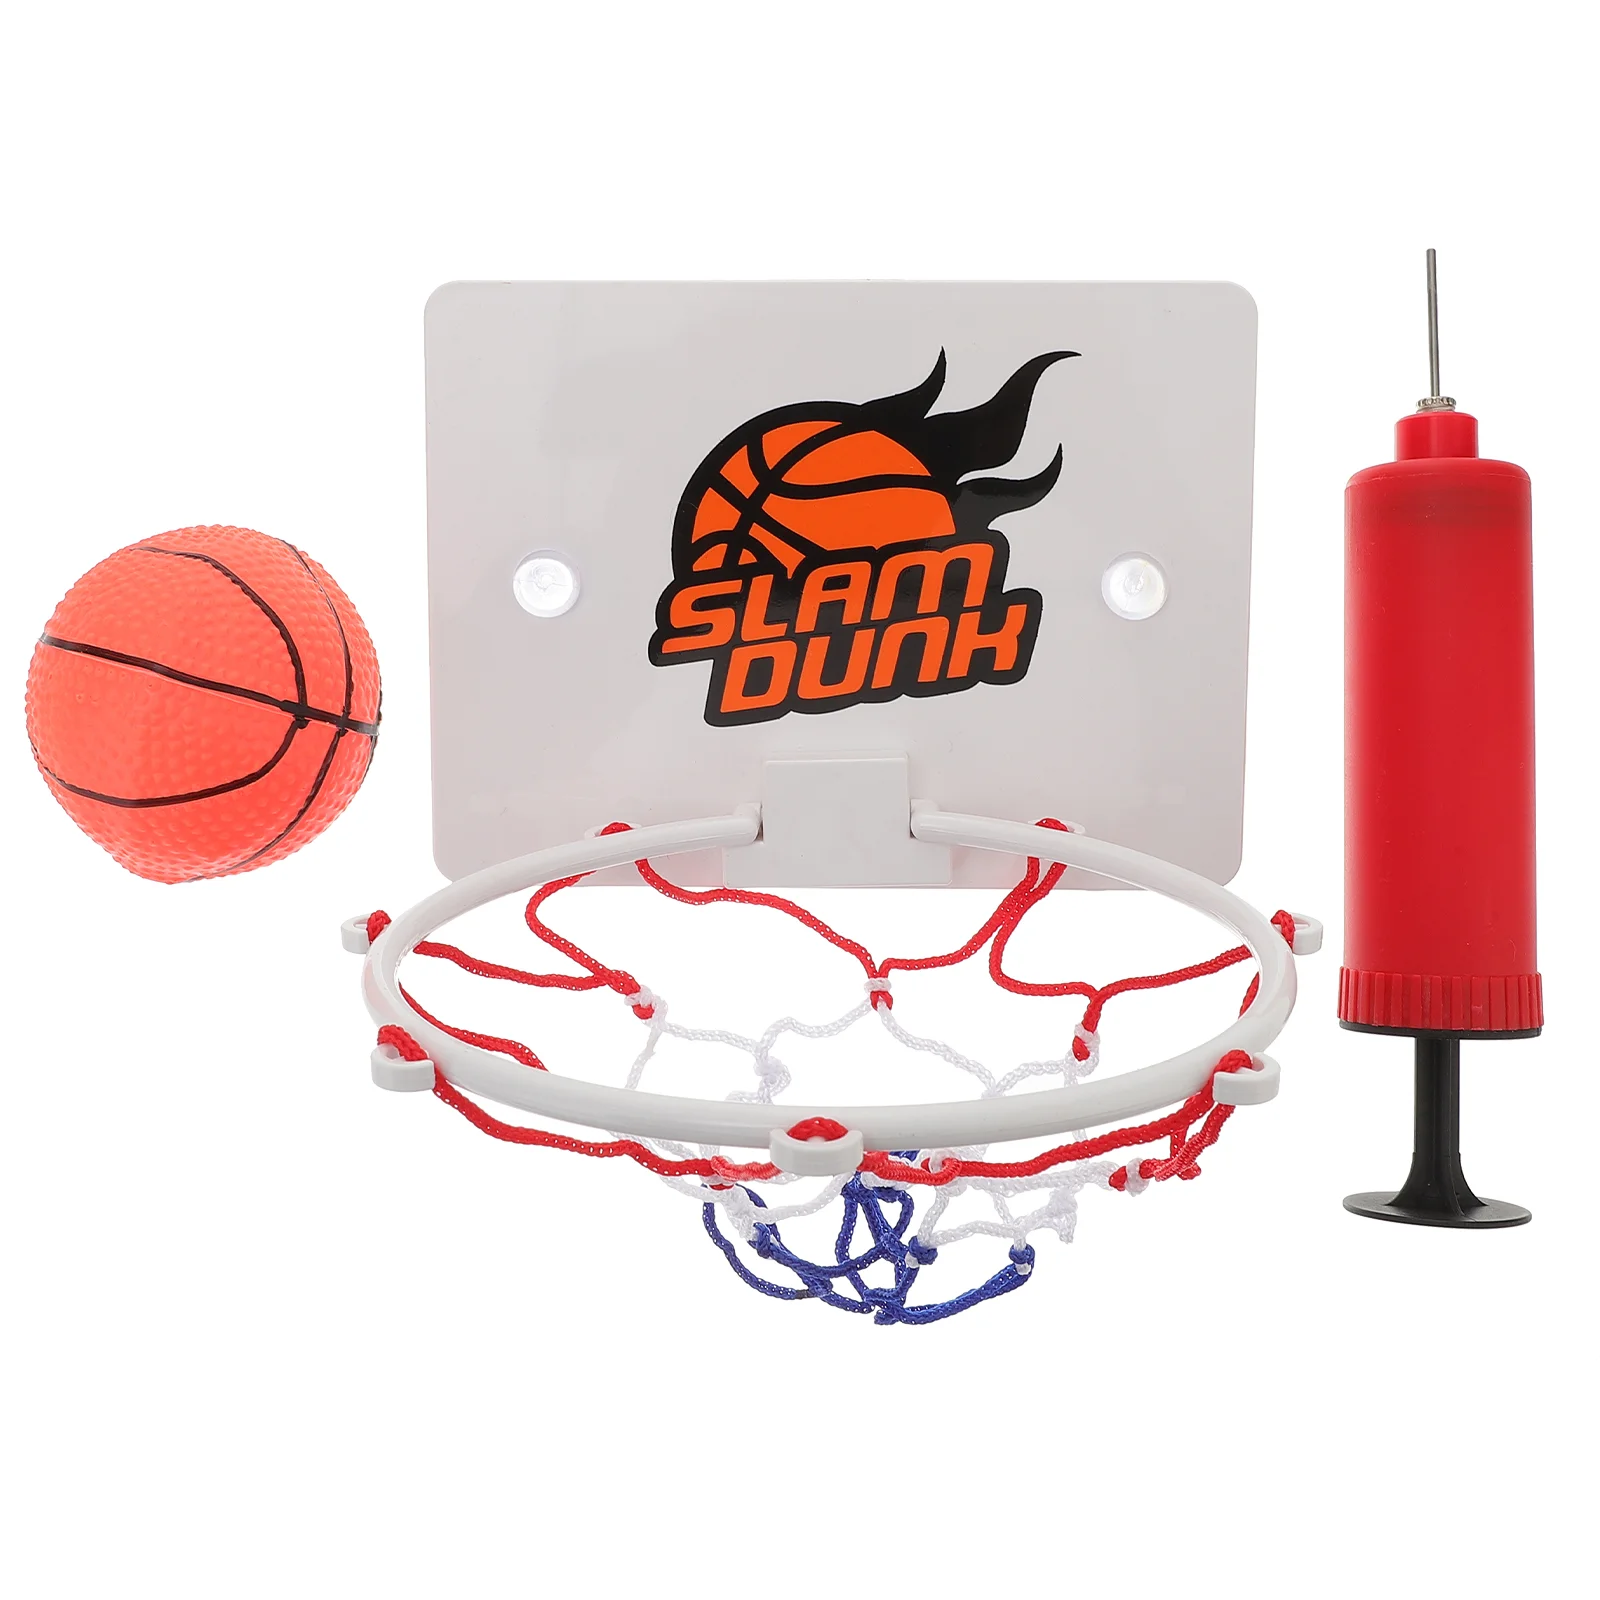 Basketball Over the Door Basketball Backboard Sports Exercise with Pump and Balls for Basketball Lovers Boys Indoor Outdoor snowman duck shape snowball maker clip tongs with handle kids winter outdoor funny snow sand mold snowball fight sports toys a